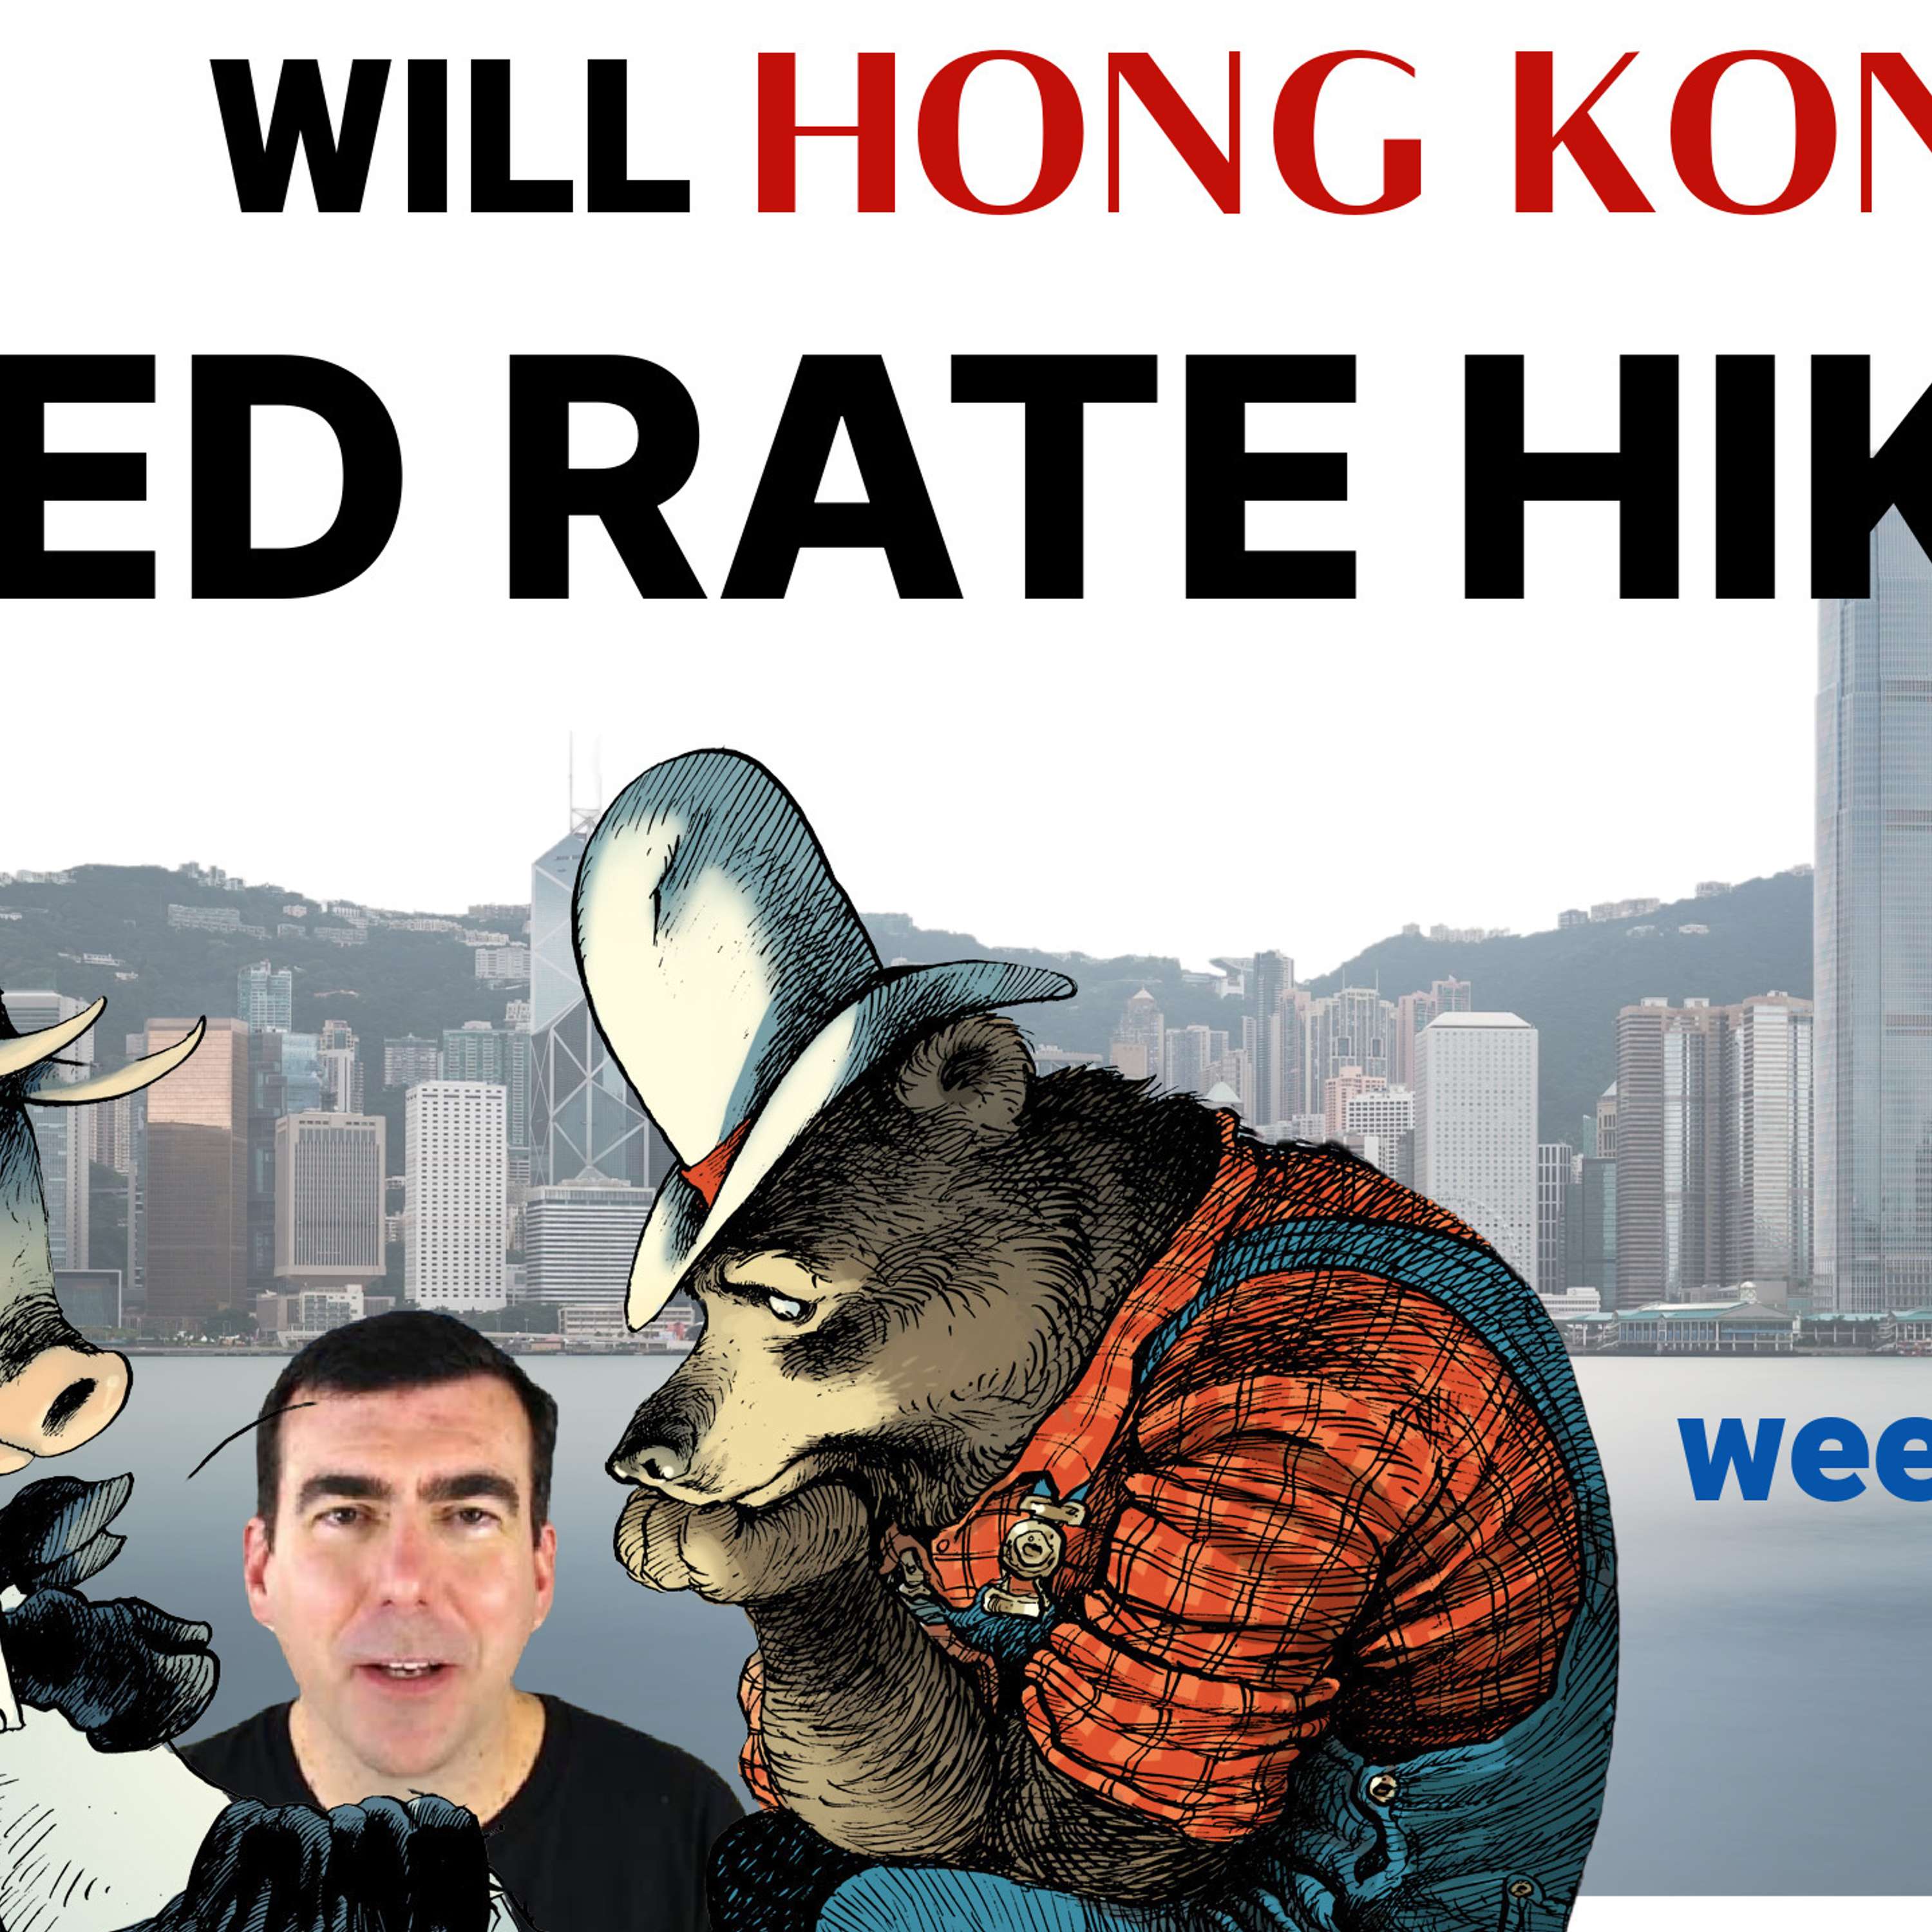 Too hot CPI. Frozen in Hong Kong. Fed hiking former. How much longer until latter disrupts it all?